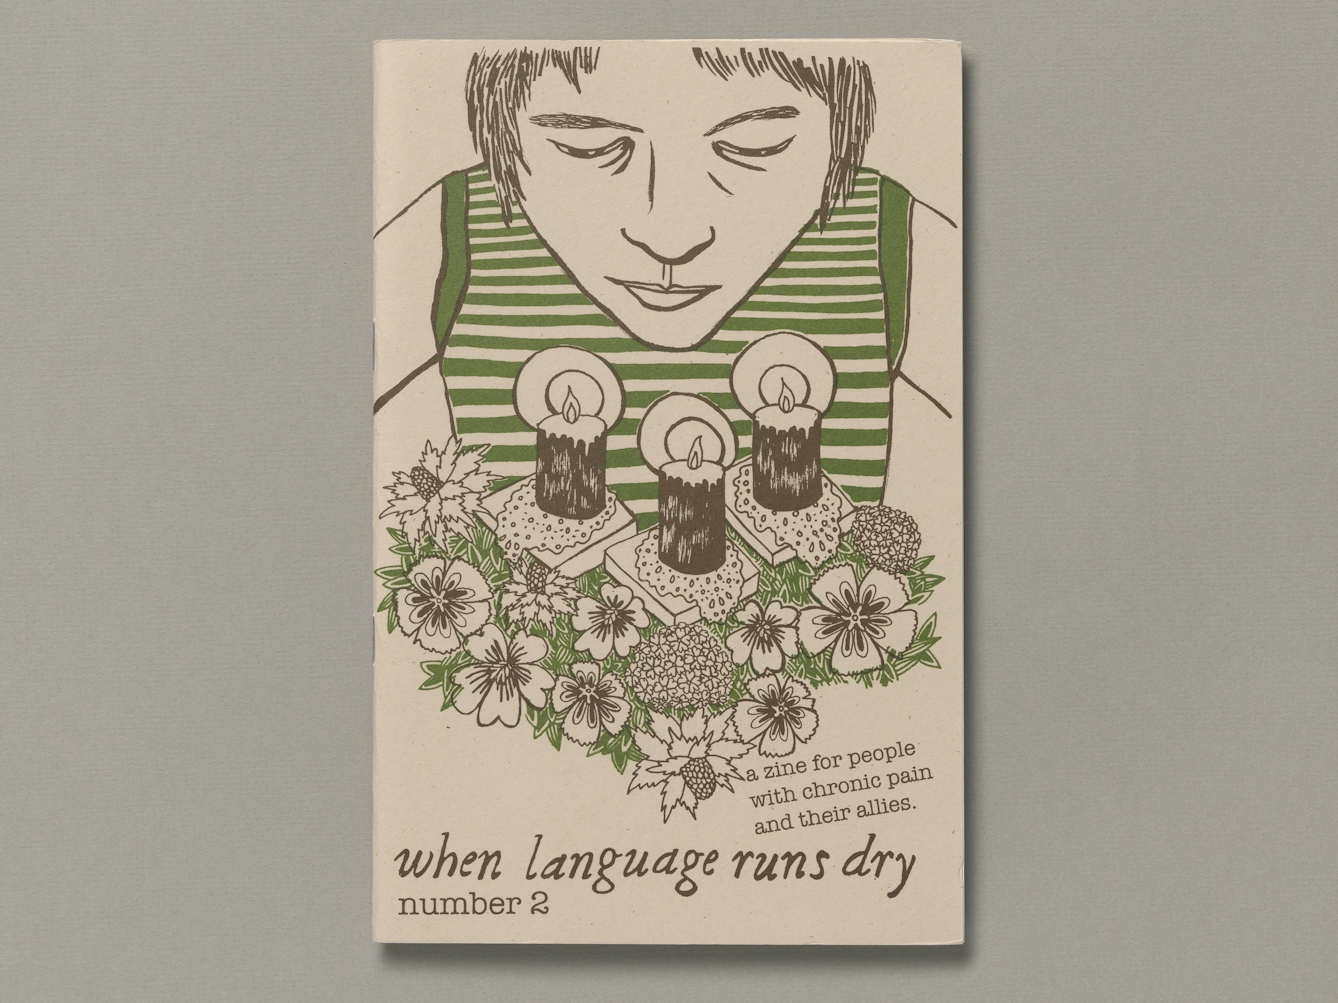 A young person leans forward over an arrangement of three lighted candles on a bed of flowers and foliage. The text below the illustration reads "when language runs dry, number 2"